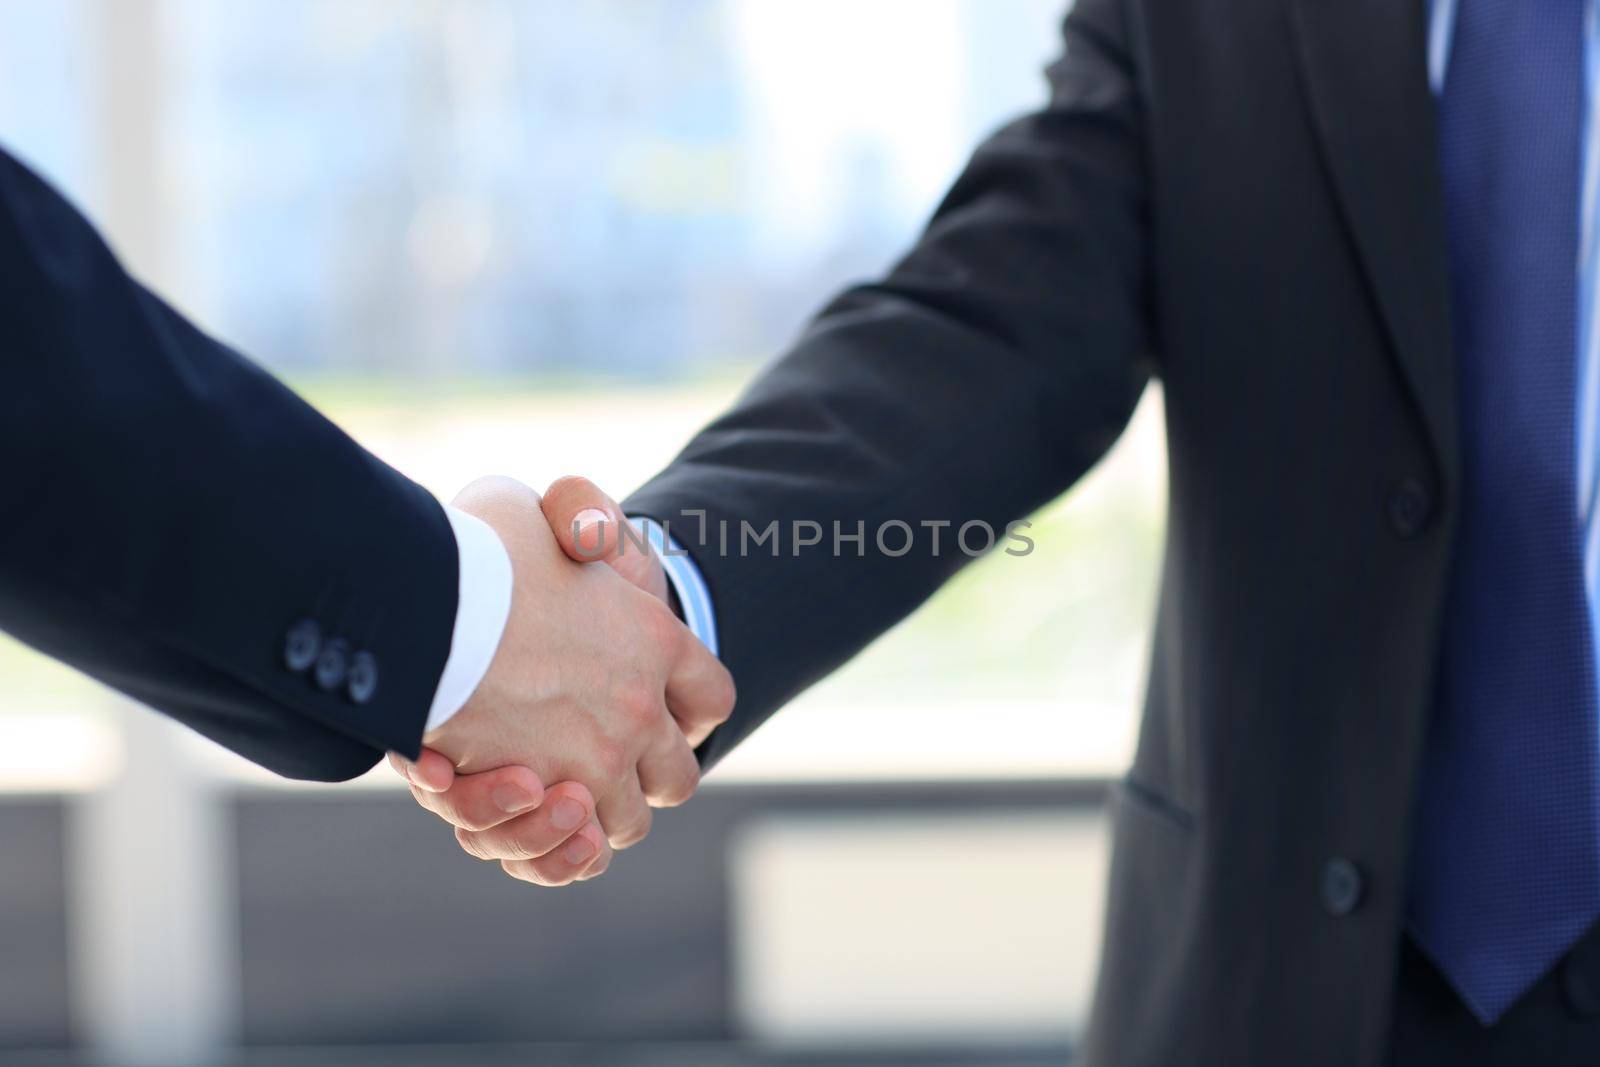 Closeup of a business hand shake between two colleagues by tsyhun